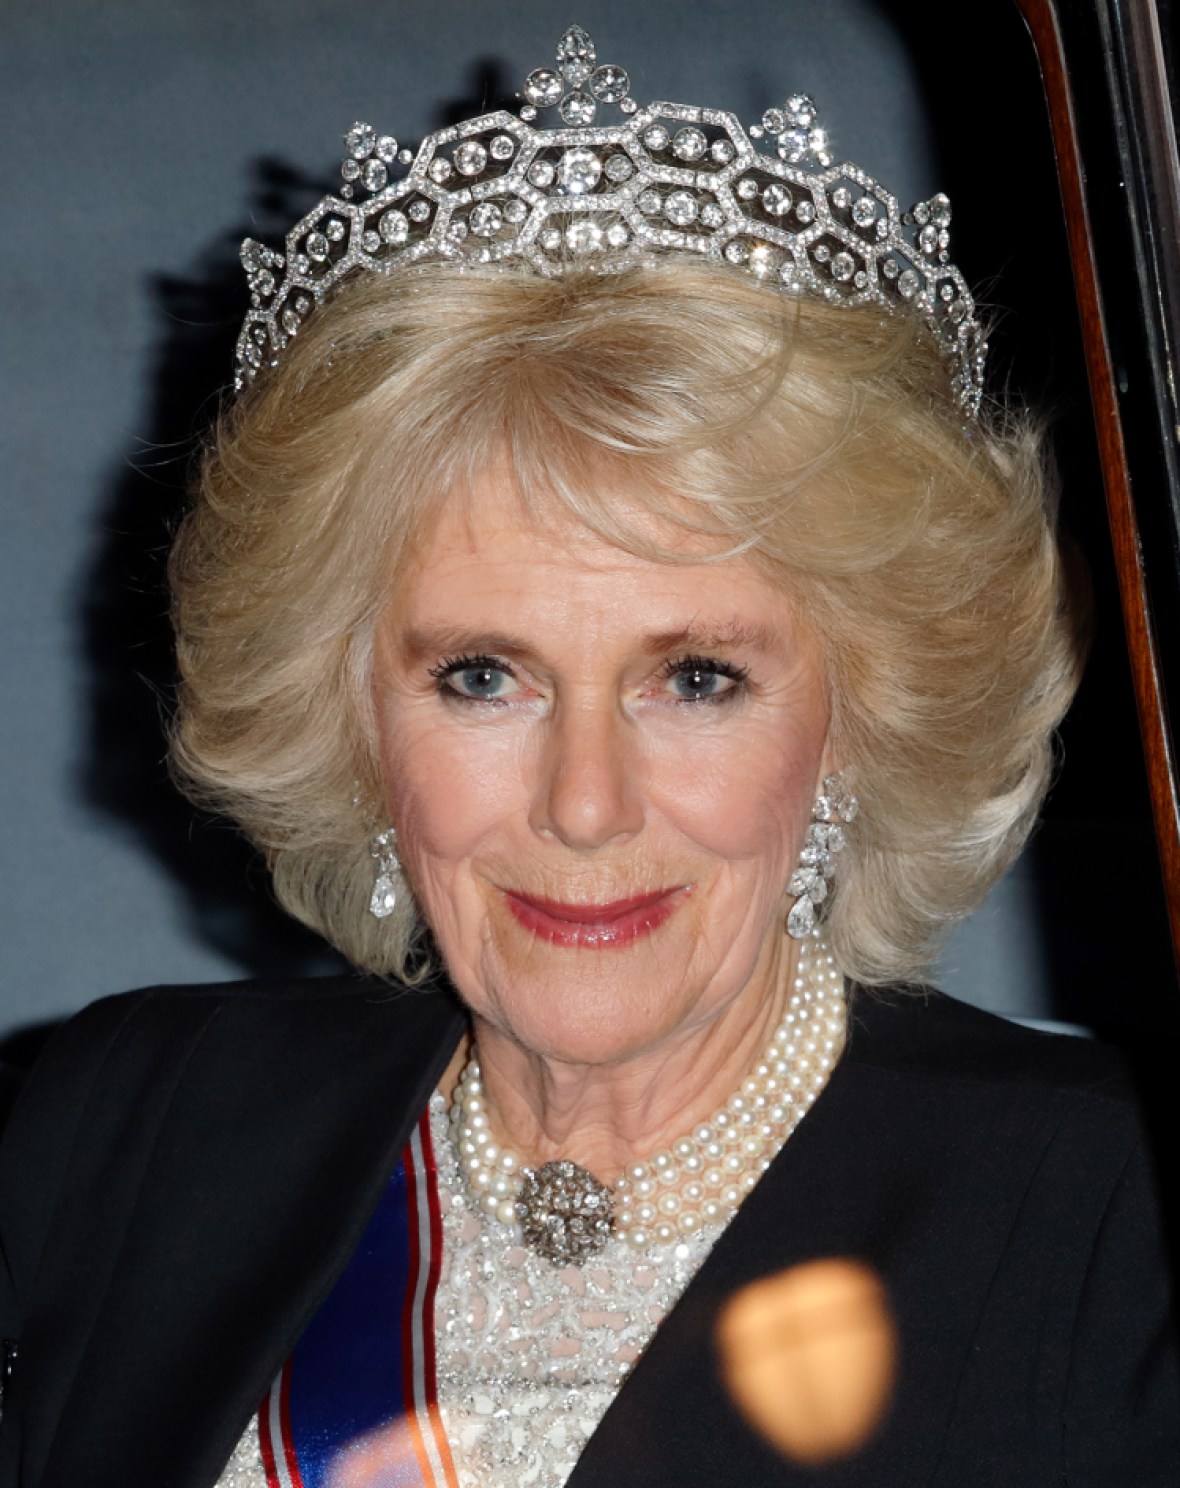 Will Camilla Be Queen When Charles King of England?